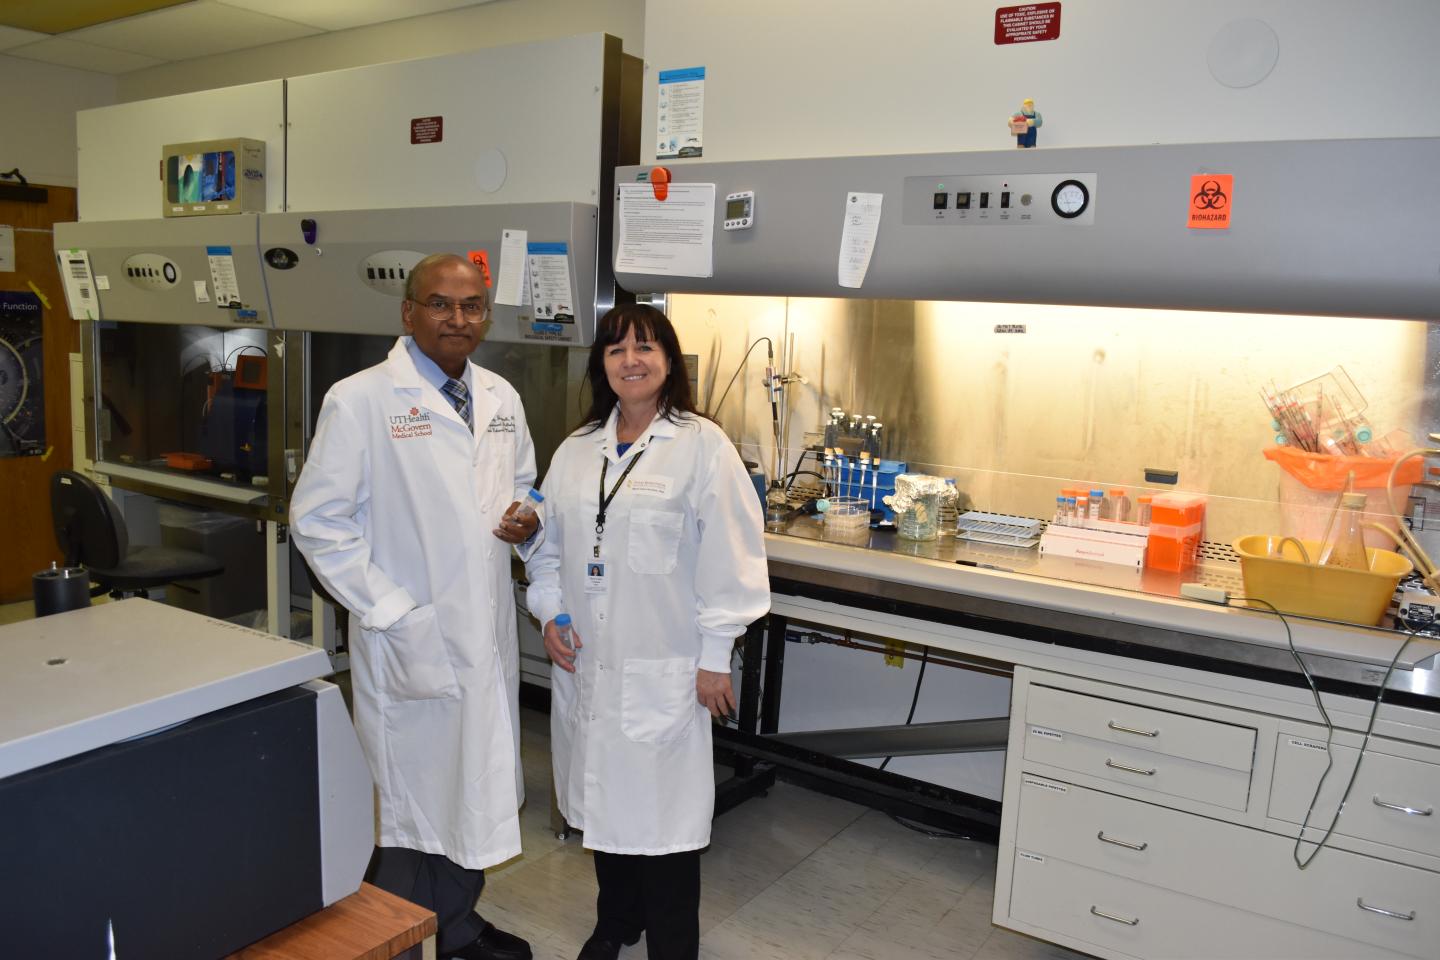 Dr. Jagannath and Dr. Gauduin, Texas Biomedical Research Institute 